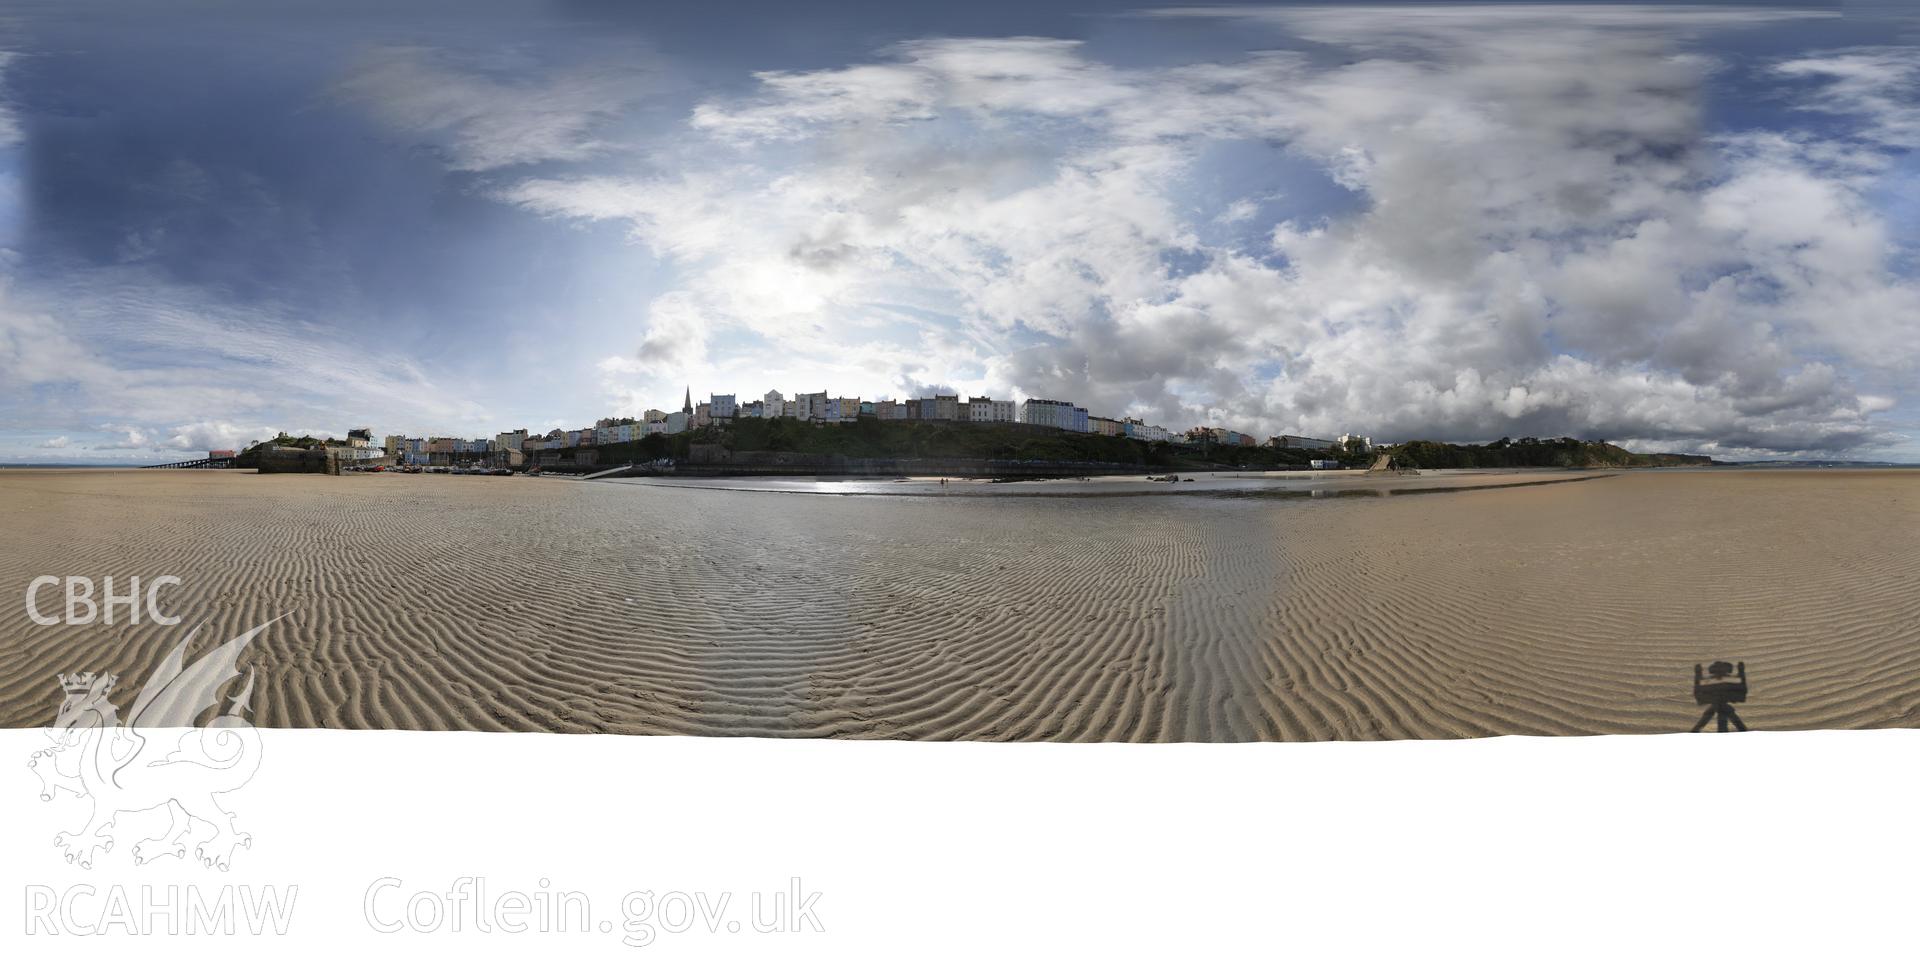 Reduced resolution tiff of stitched images from North Beach, Tenby survey, carried out by  Sue Fielding and Rita Singer, July 2017. Produced through European Travellers to Wales project. Uncropped tiff required for panotour.